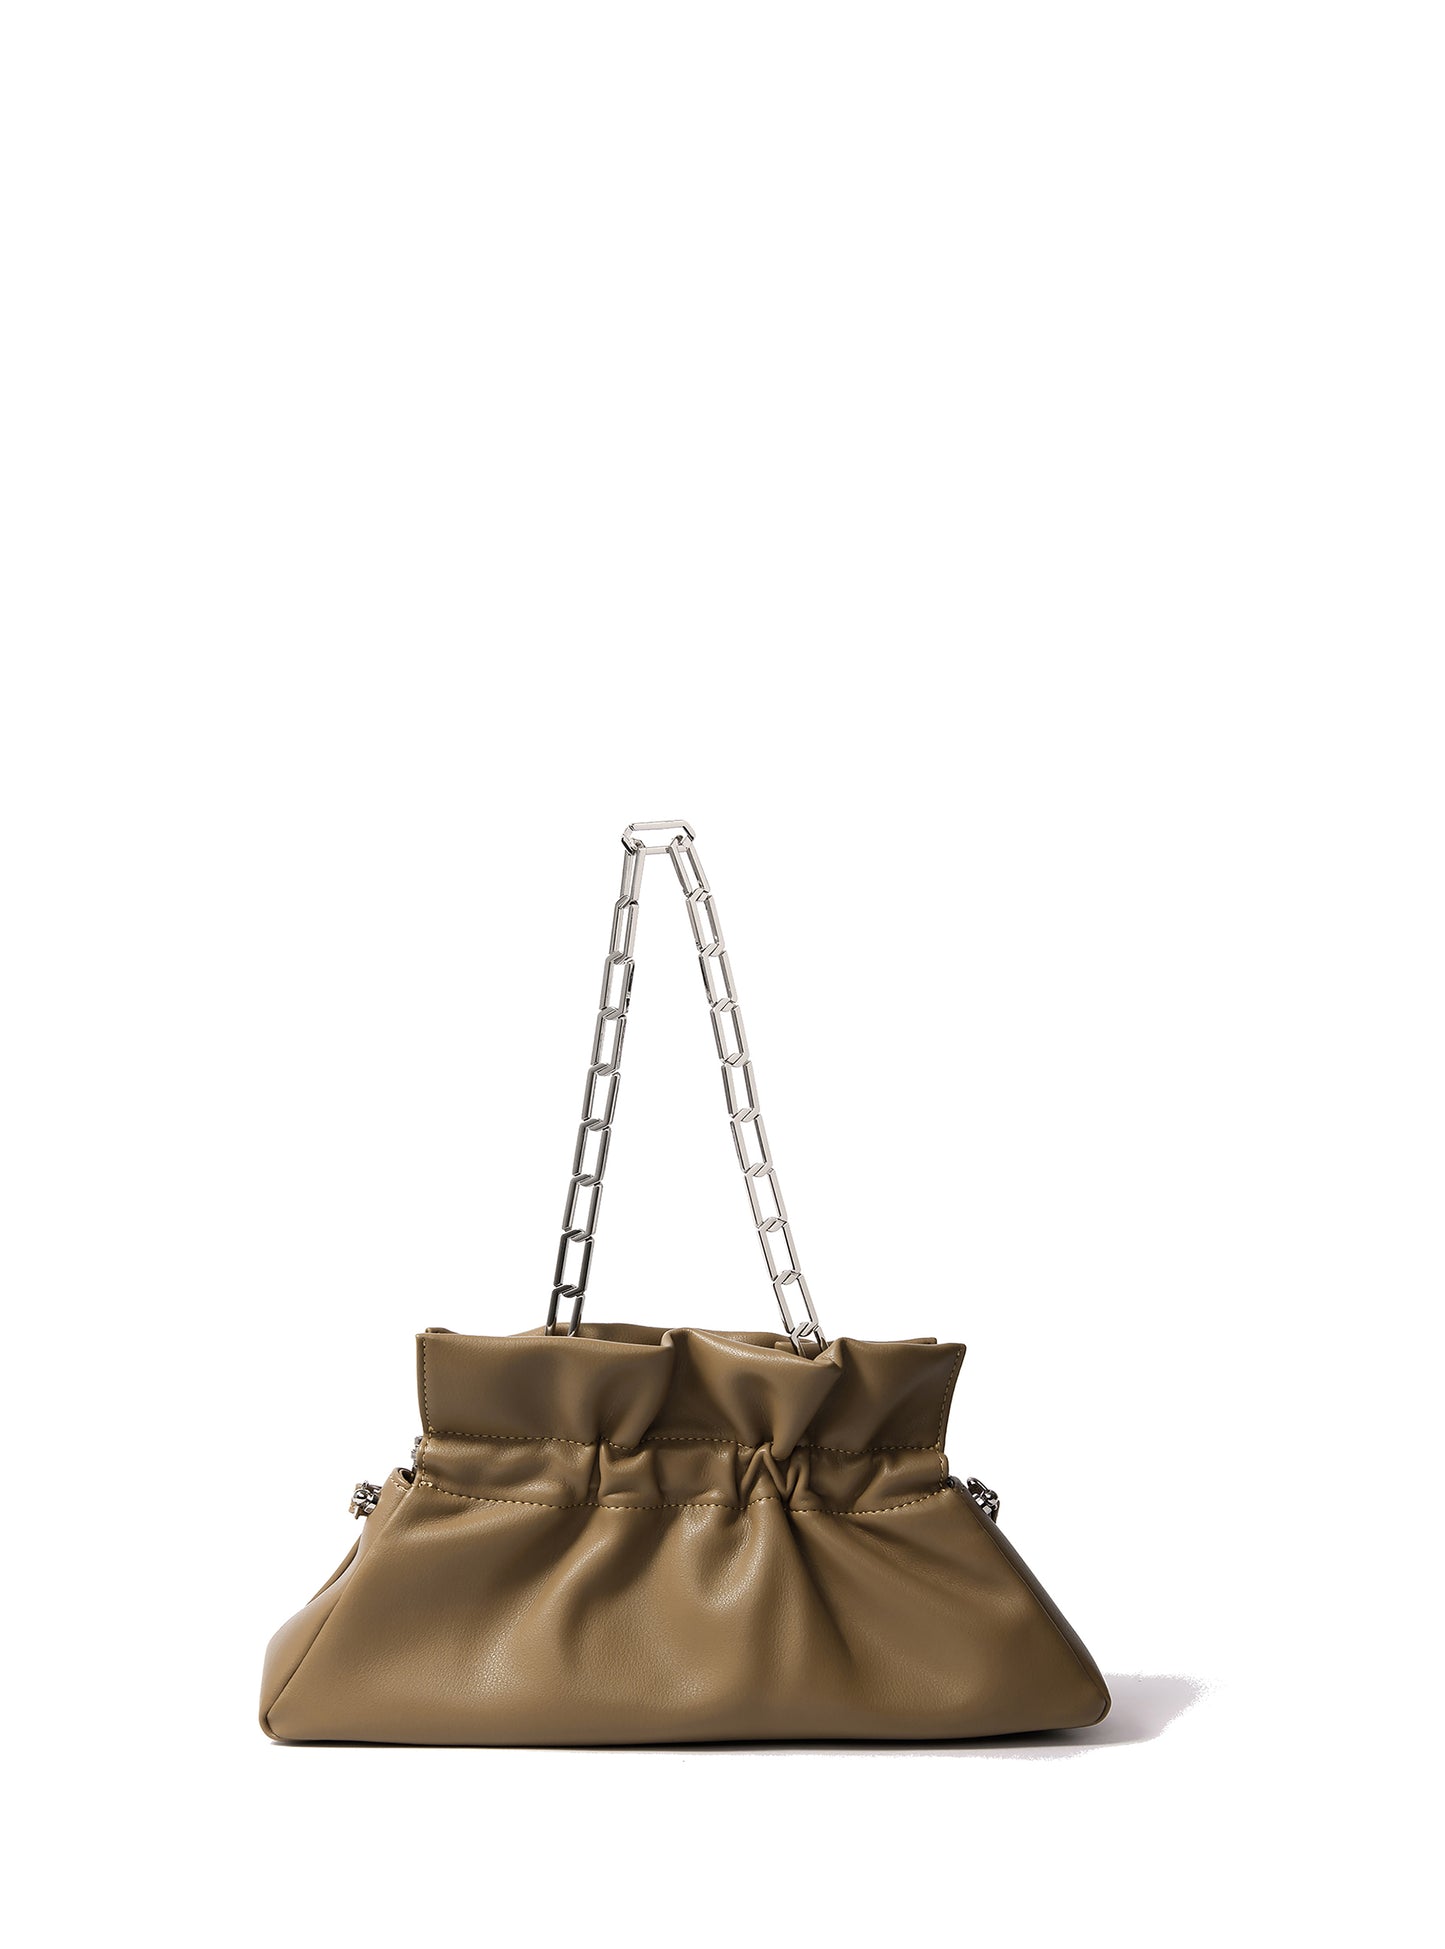 Mila Bag in Smooth Leather, Mustard Green